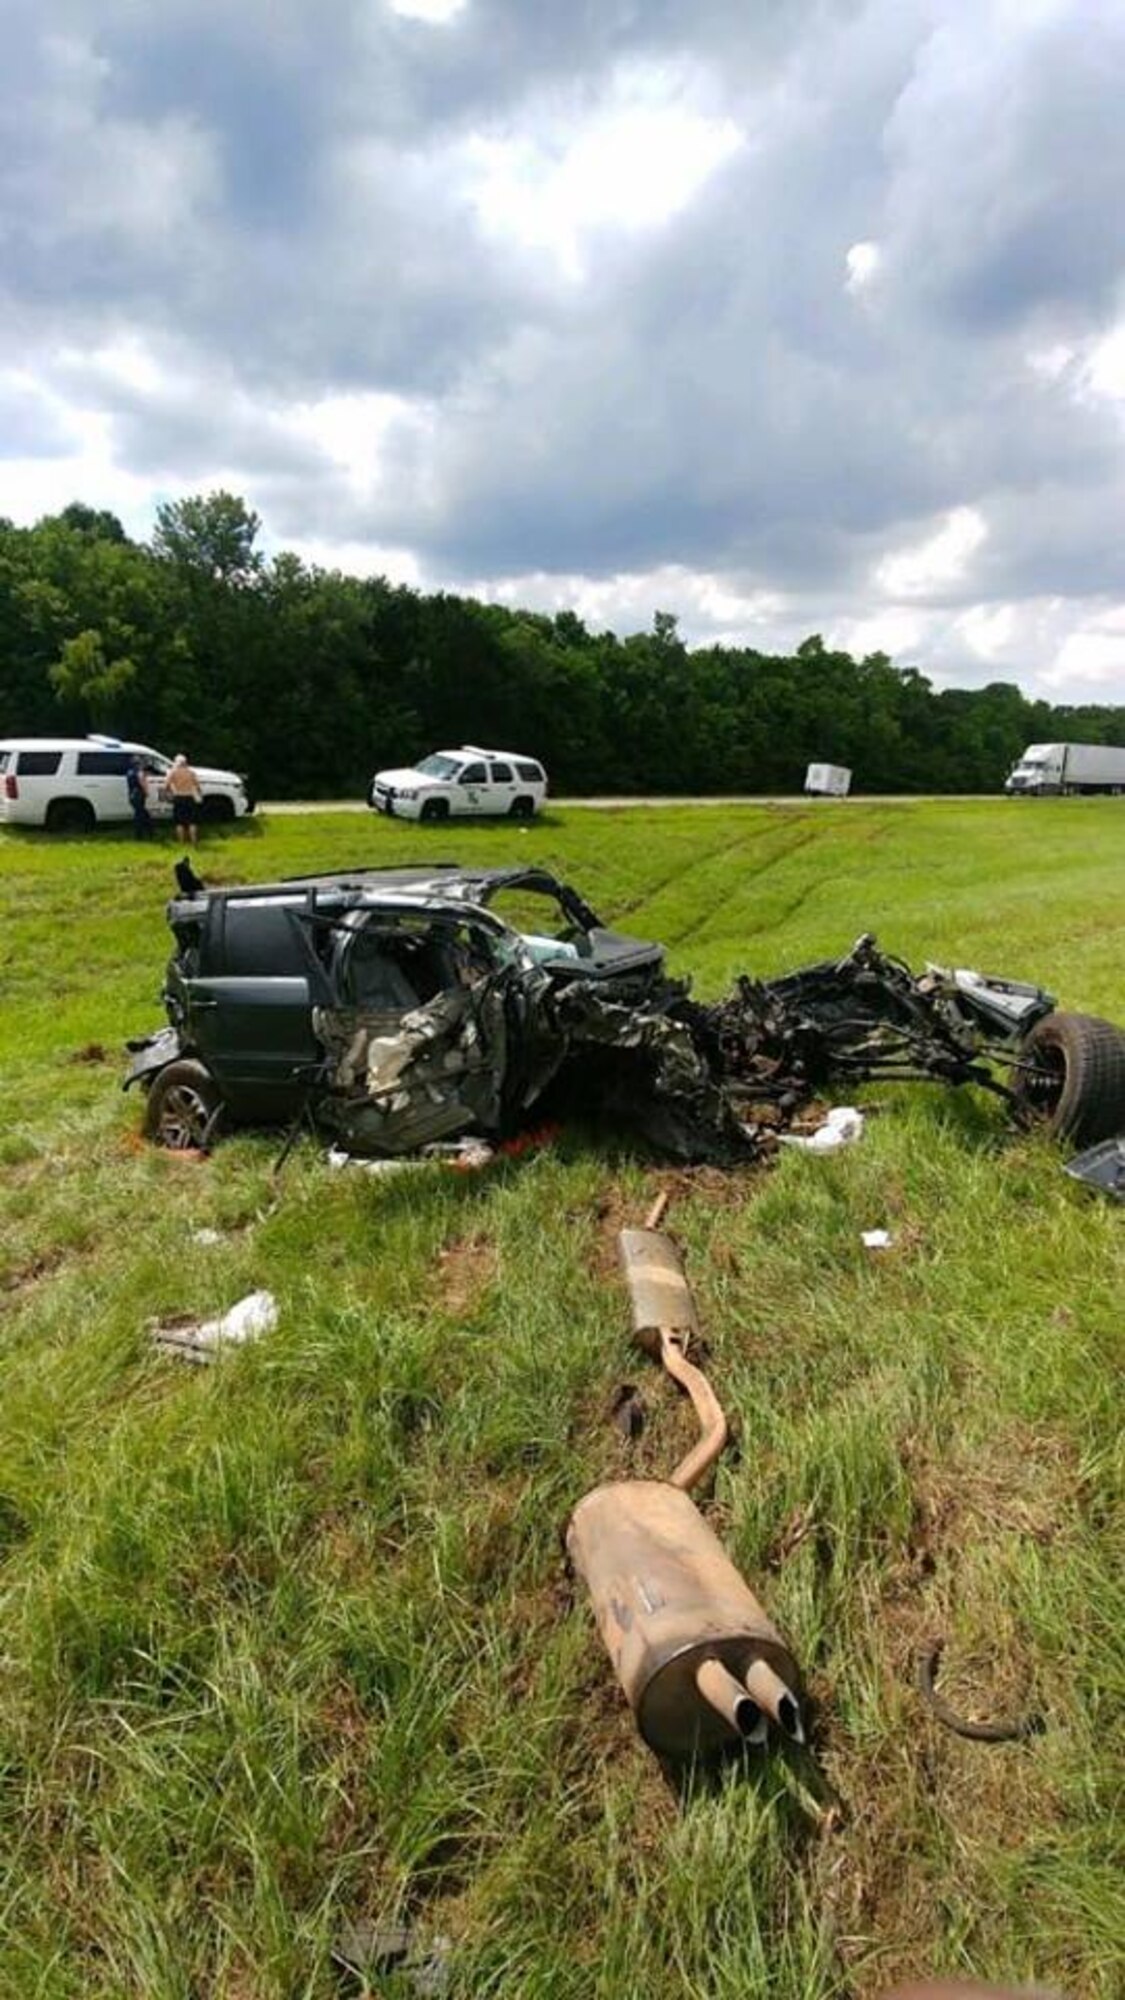 Wreckage from a vehicle litters the median of Interstate-49 after an accident outside Opelousas, Louisiana, May 24, 2018.  The vehicle hit a semitractor trailer going northbound. The driver, Jason Hesni, sustained life-threatening injuries. U.S. Air Force Chief Master Sgt. Shelley Cohen, 307th Bomb Wing command chief, happened upon the scene, administering first-aid and saving Hesni’s life. (courtesy photo)